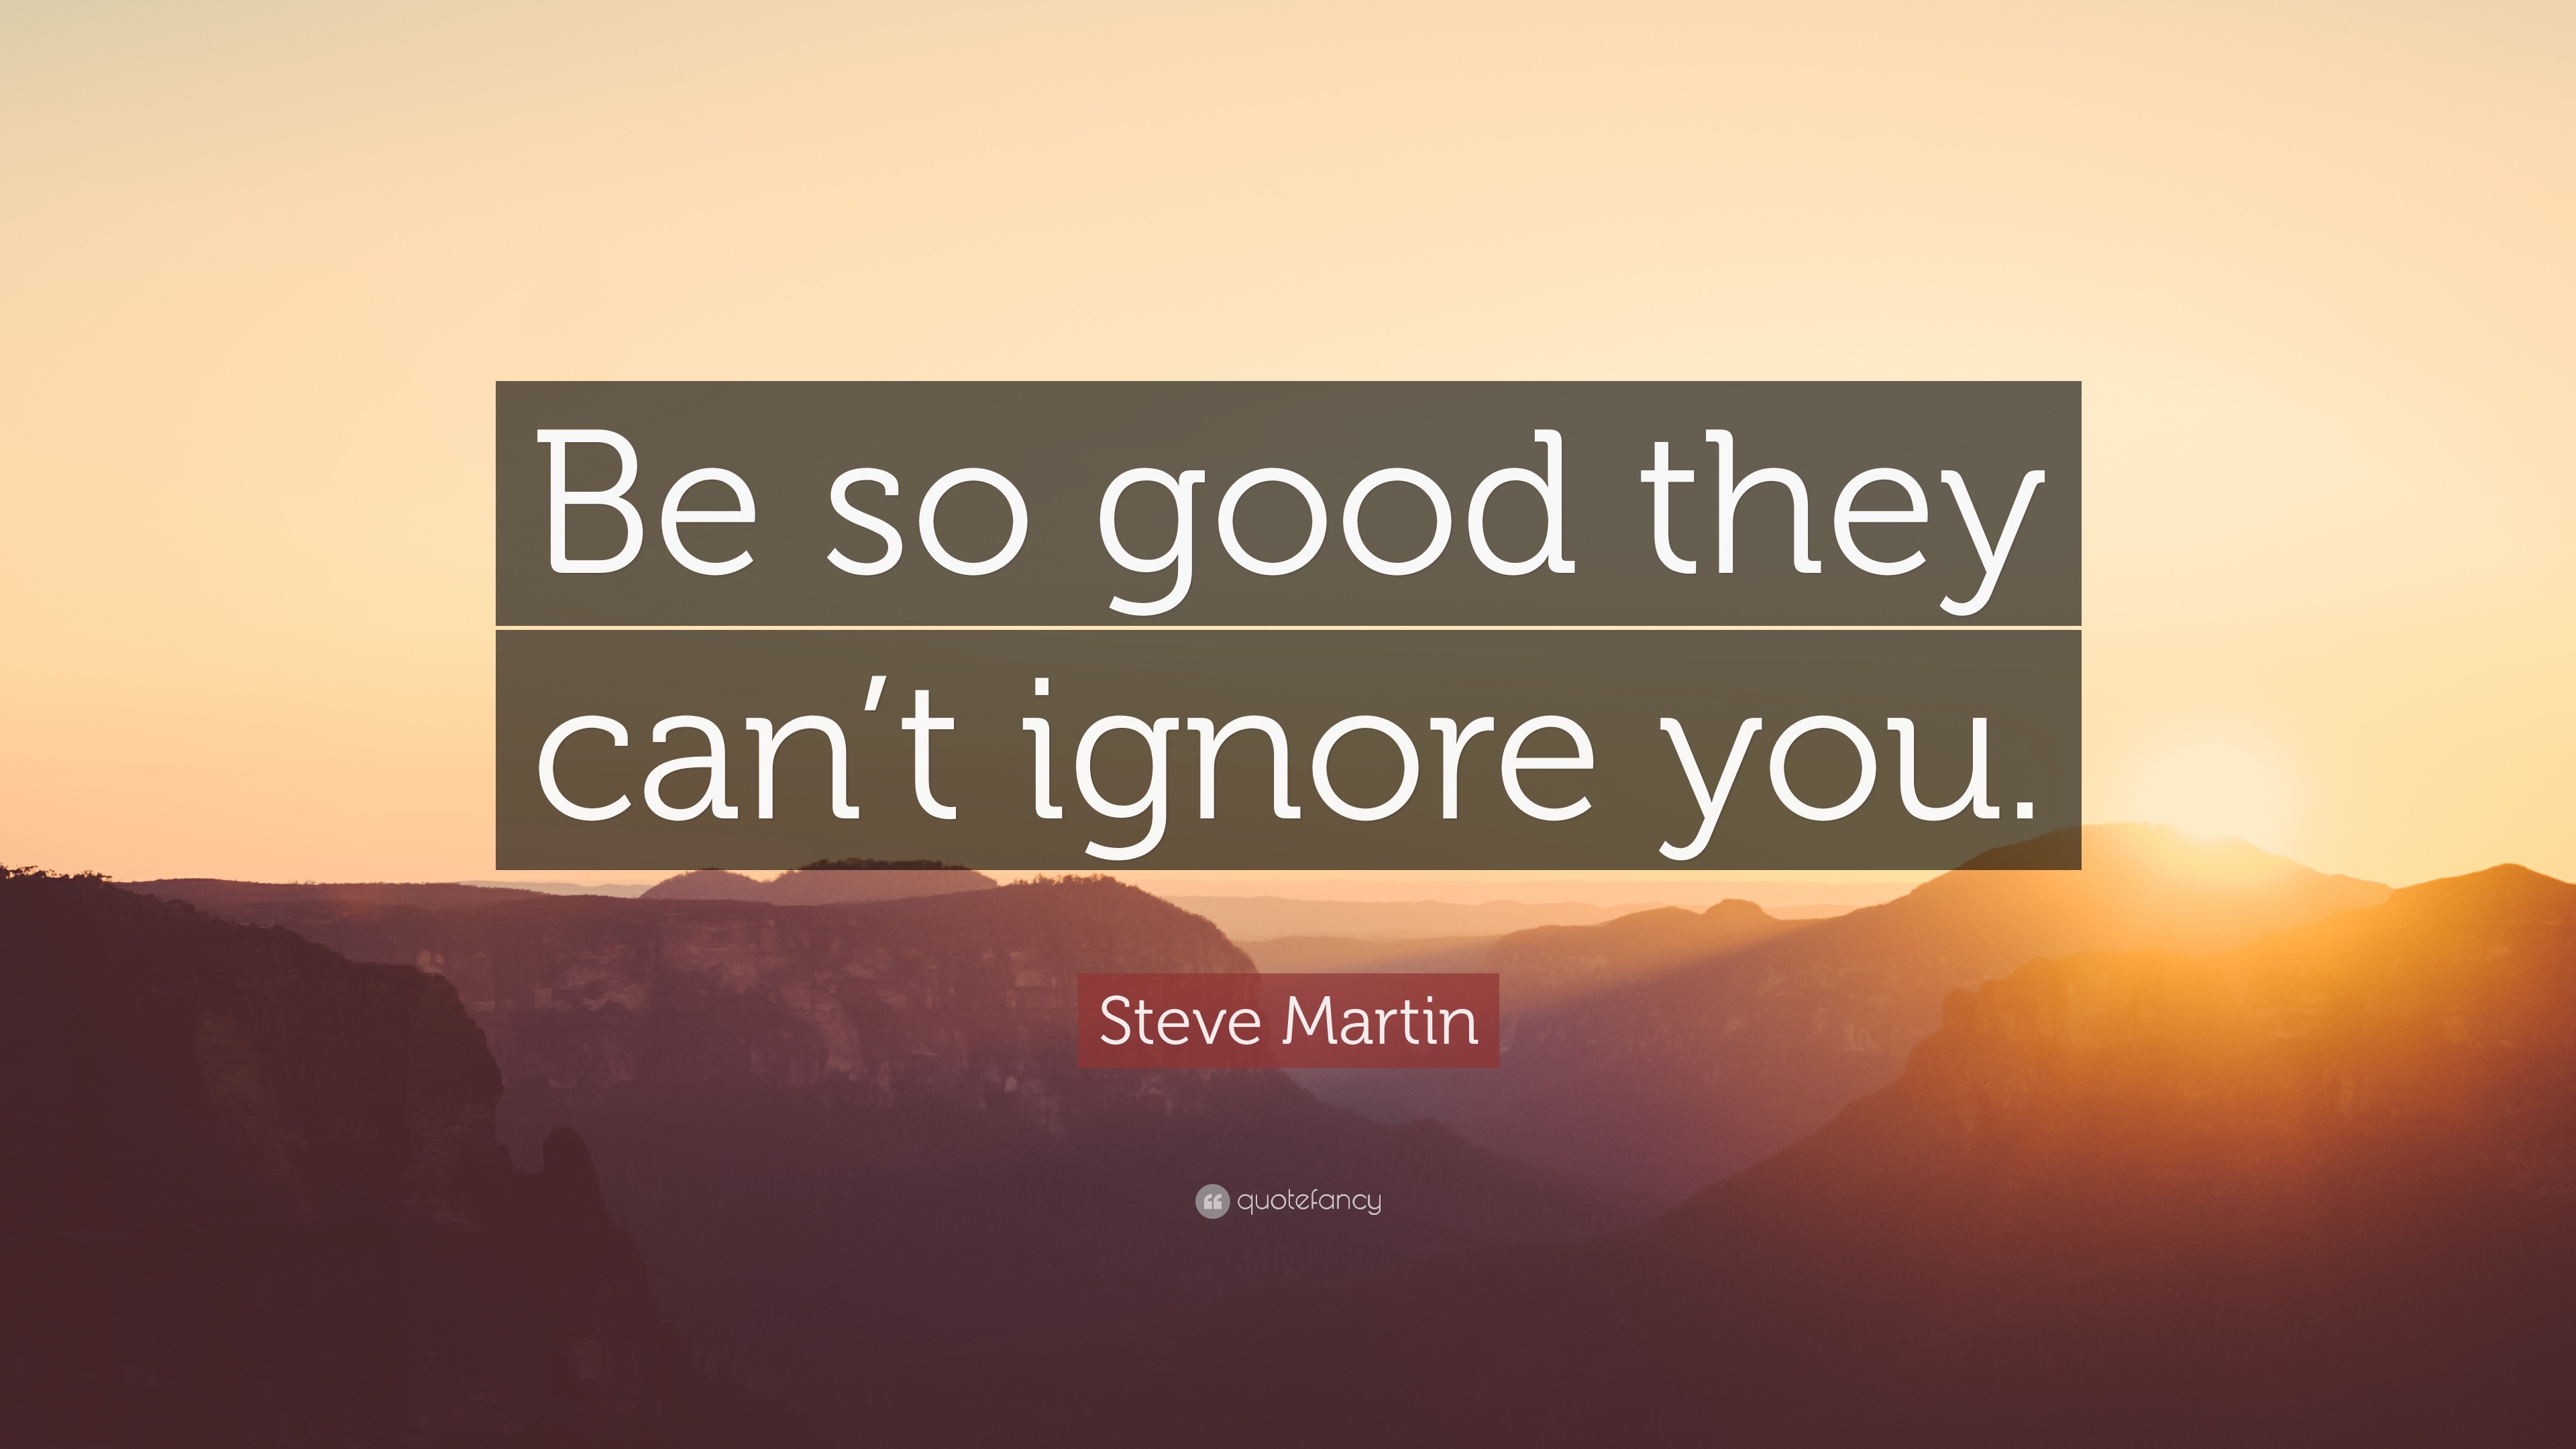 20835-Steve-Martin-Quote-Be-so-good-they-can-t-ignore-you.jpg.